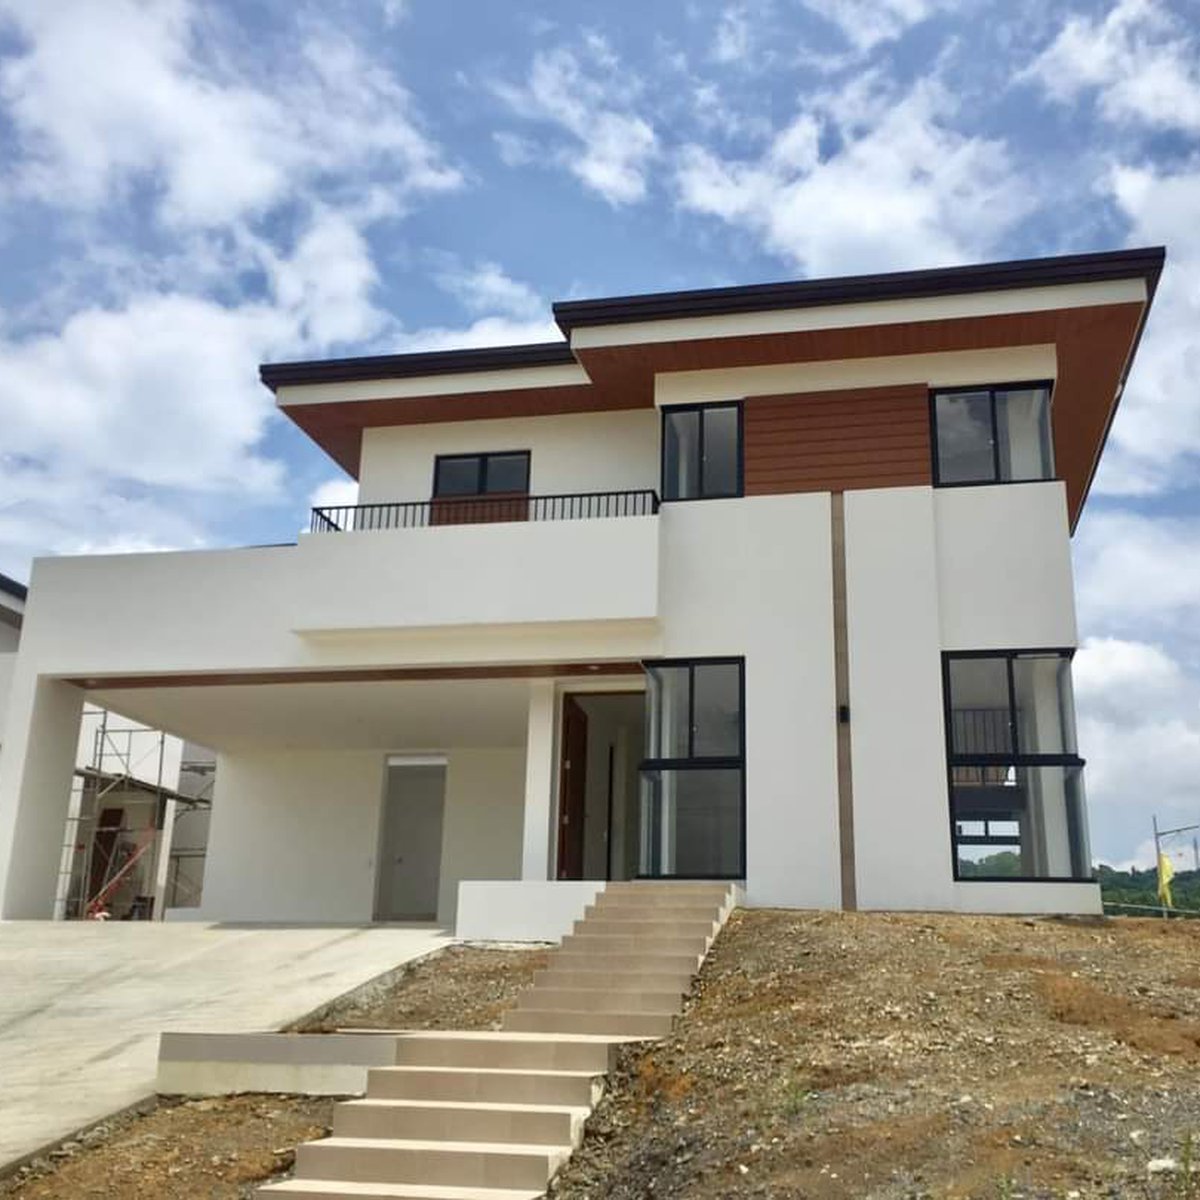 4 bedroom single detached house for sale in antipolo rizal